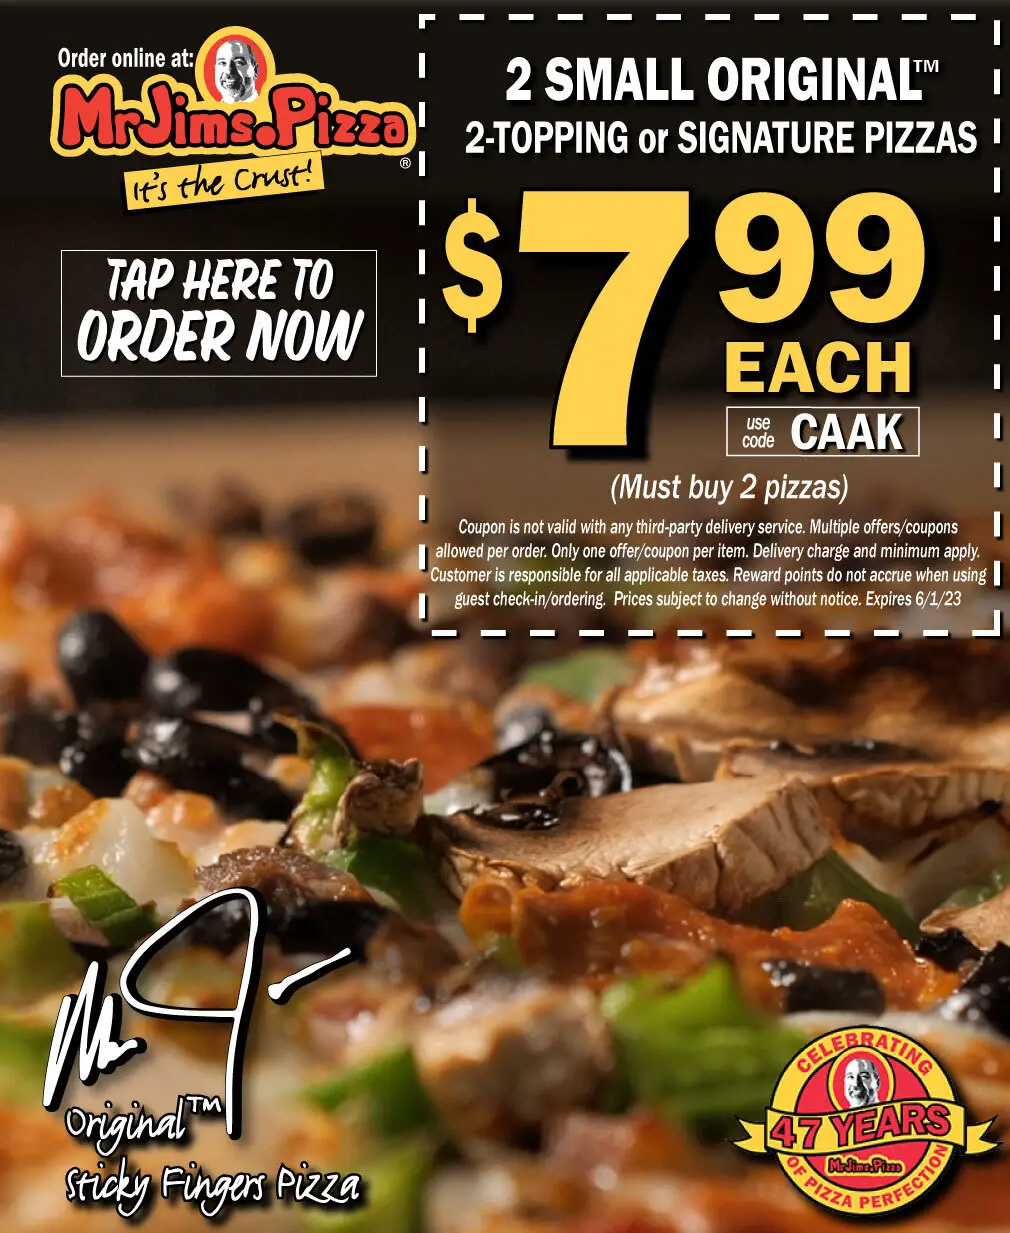 Mr. Jim's Pizza Cinco de Mayo Order 2 Small Original 2-Topping or Signature Pizzas for Only $7.99 Each